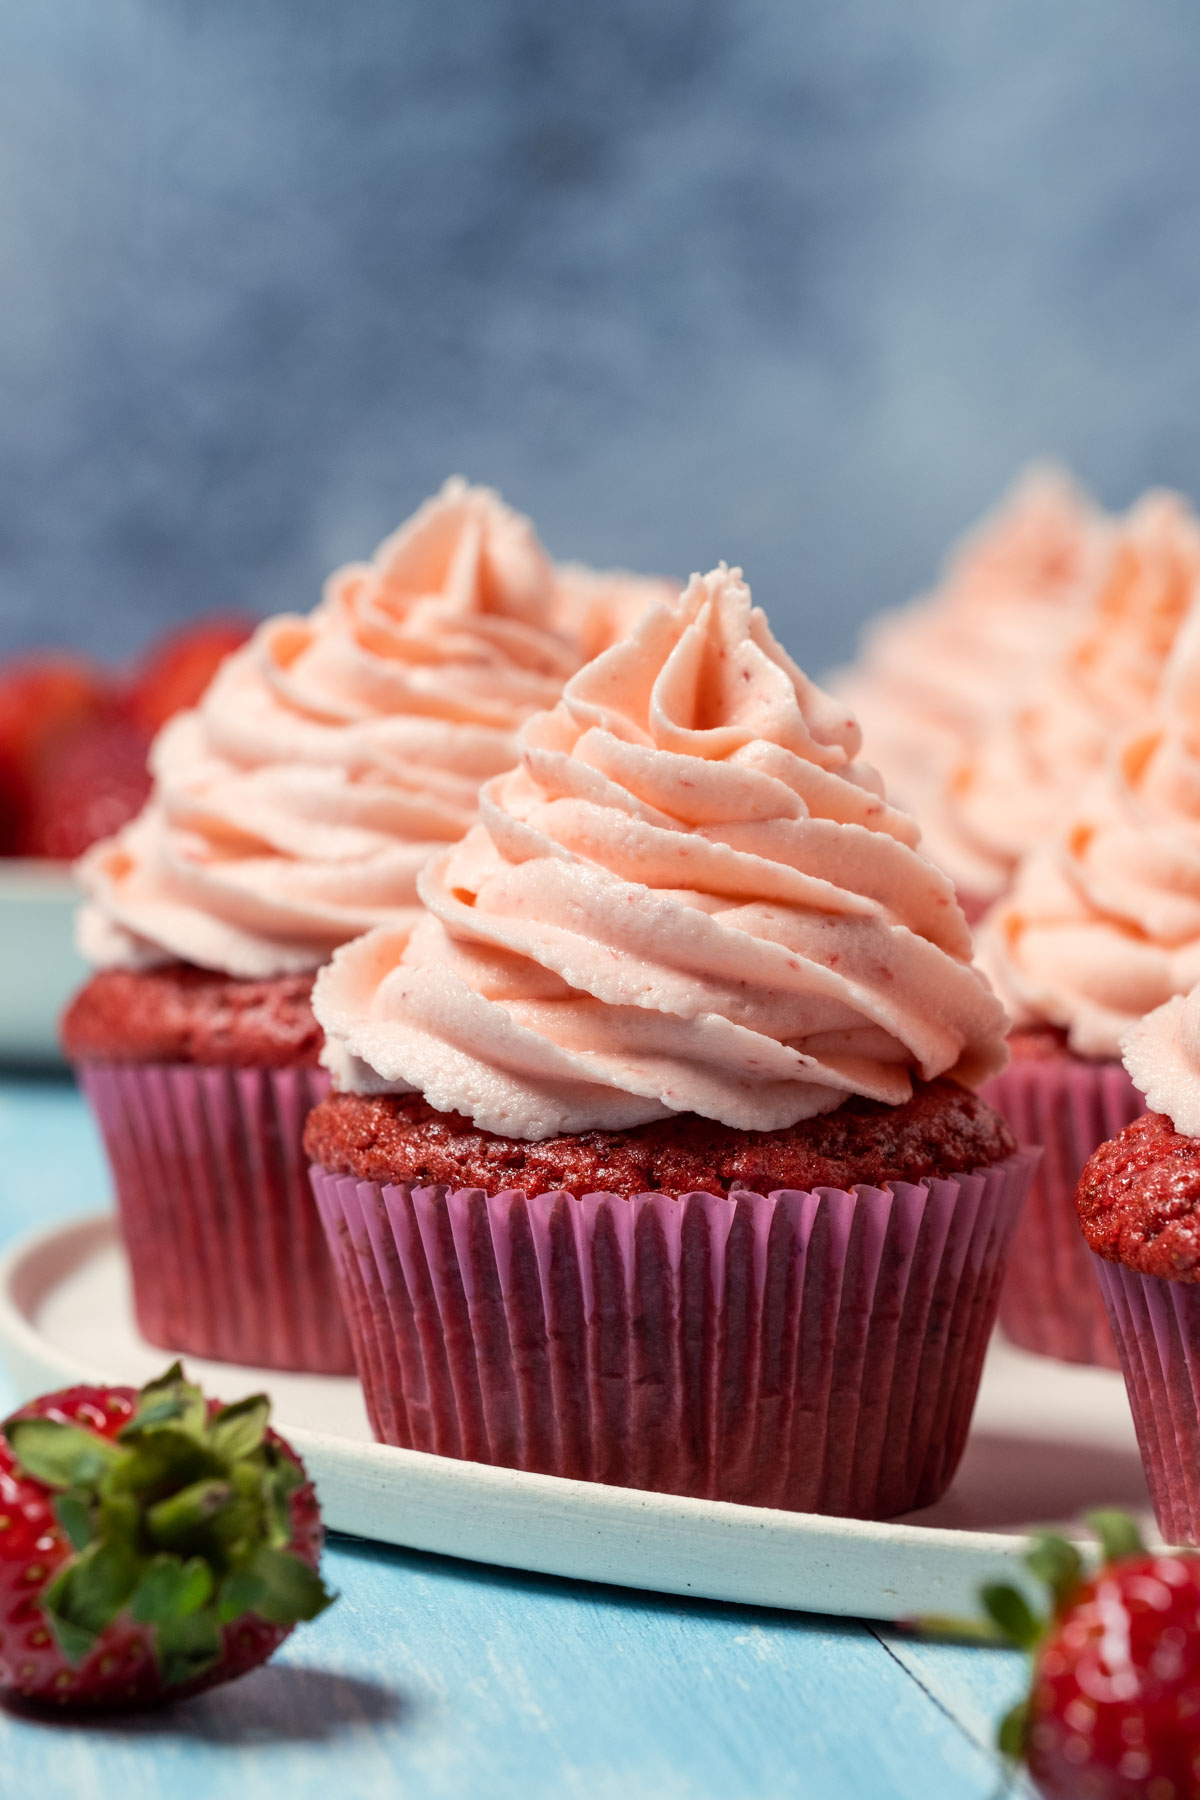 Vegan strawberry cupcakes on a white plate.